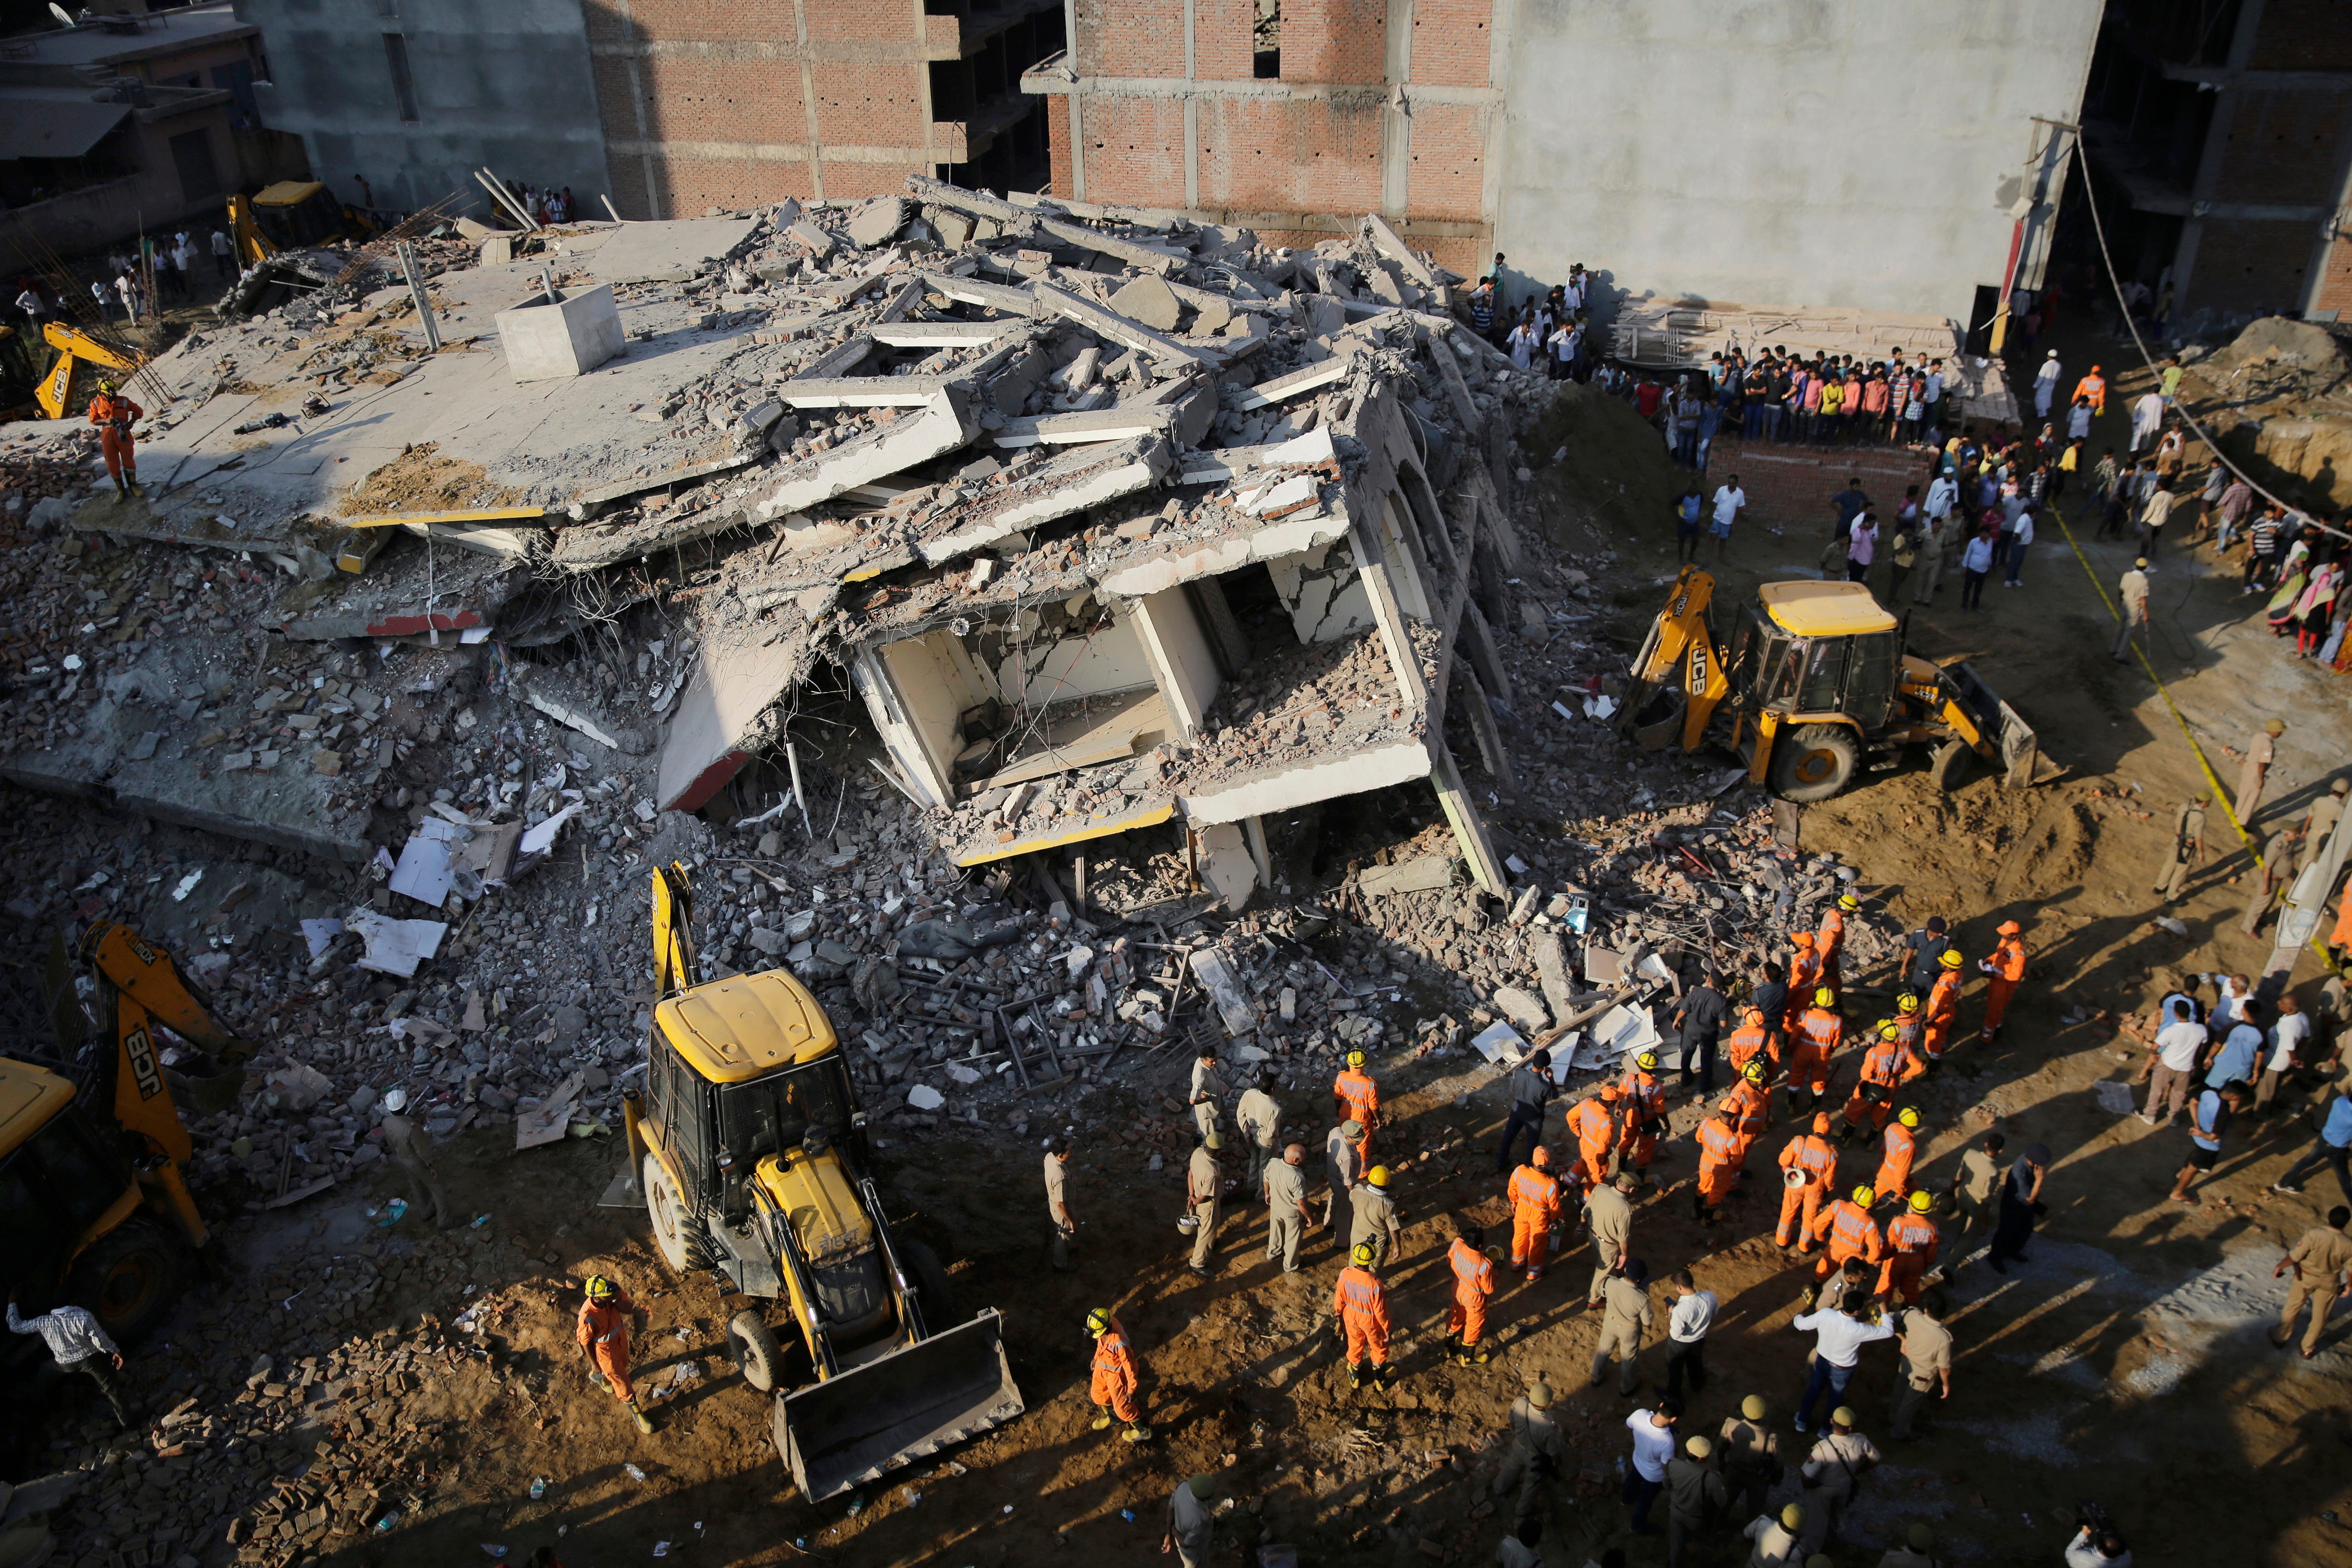 Rescuers work at the site of a building collapsed in Shahberi village, east of New Delhi, India, July 18, 2018. The six-story building under construction collapsed onto an adjacent building.